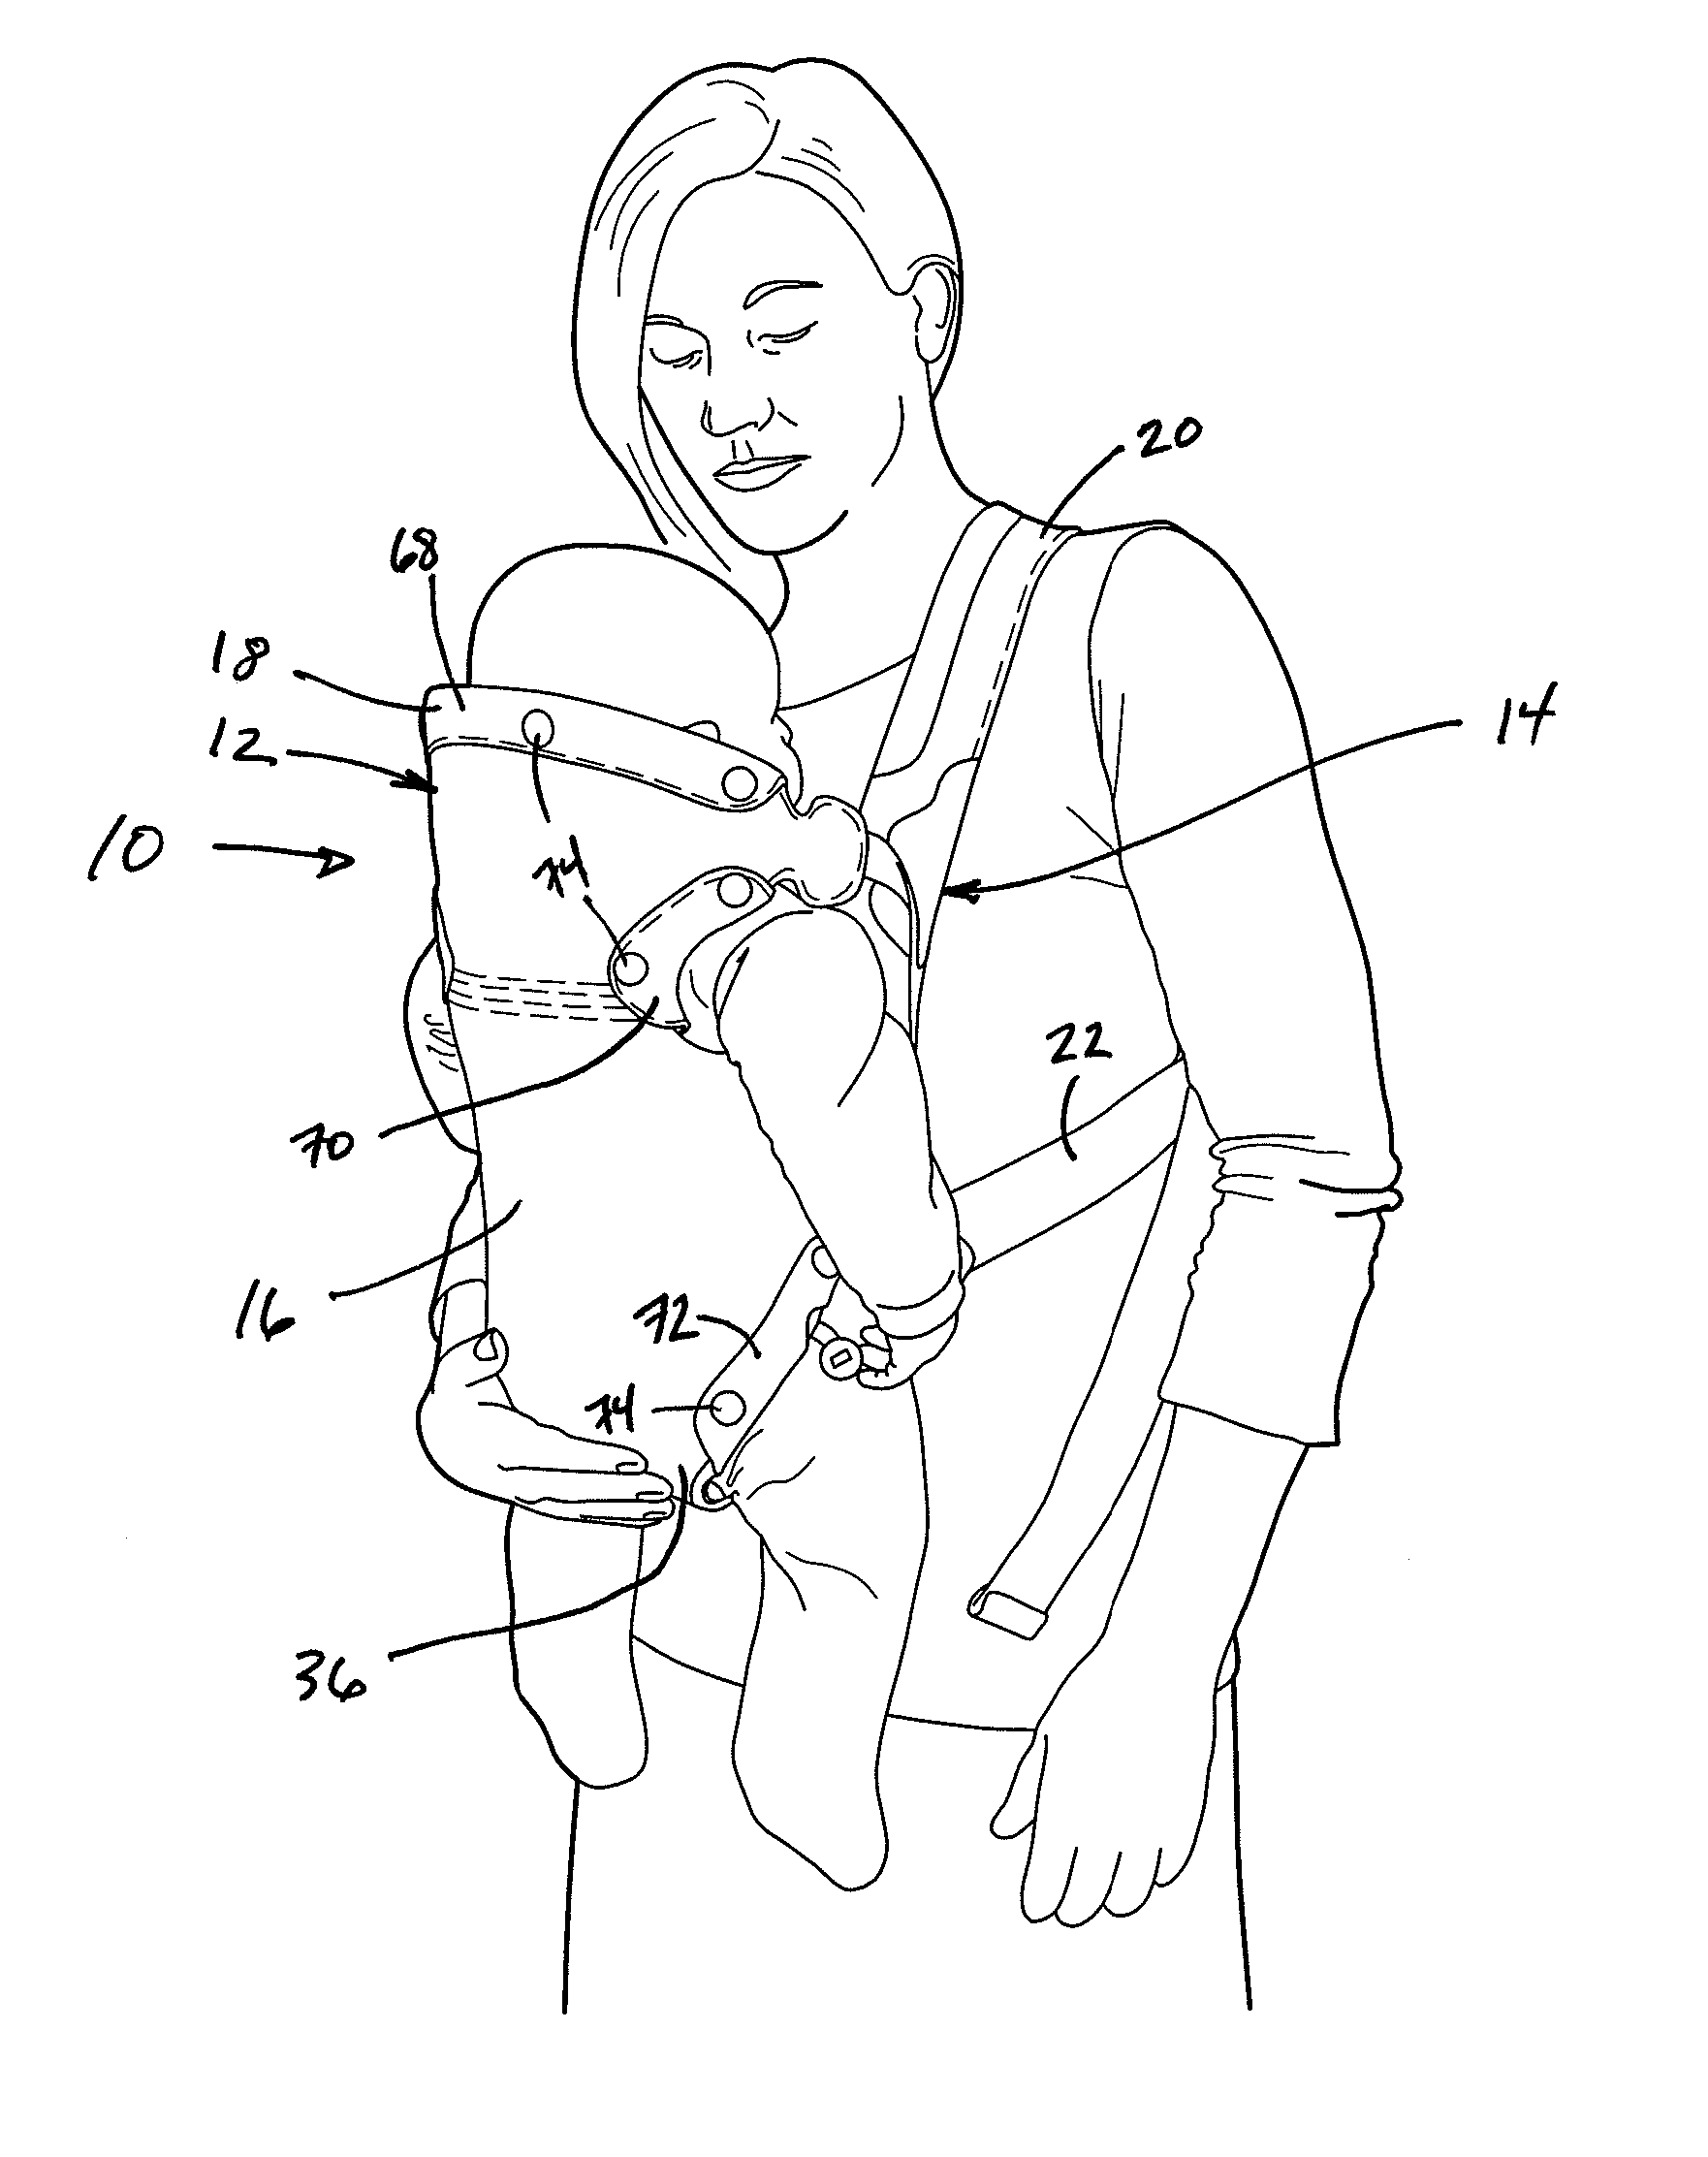 Child carrier with removable liner